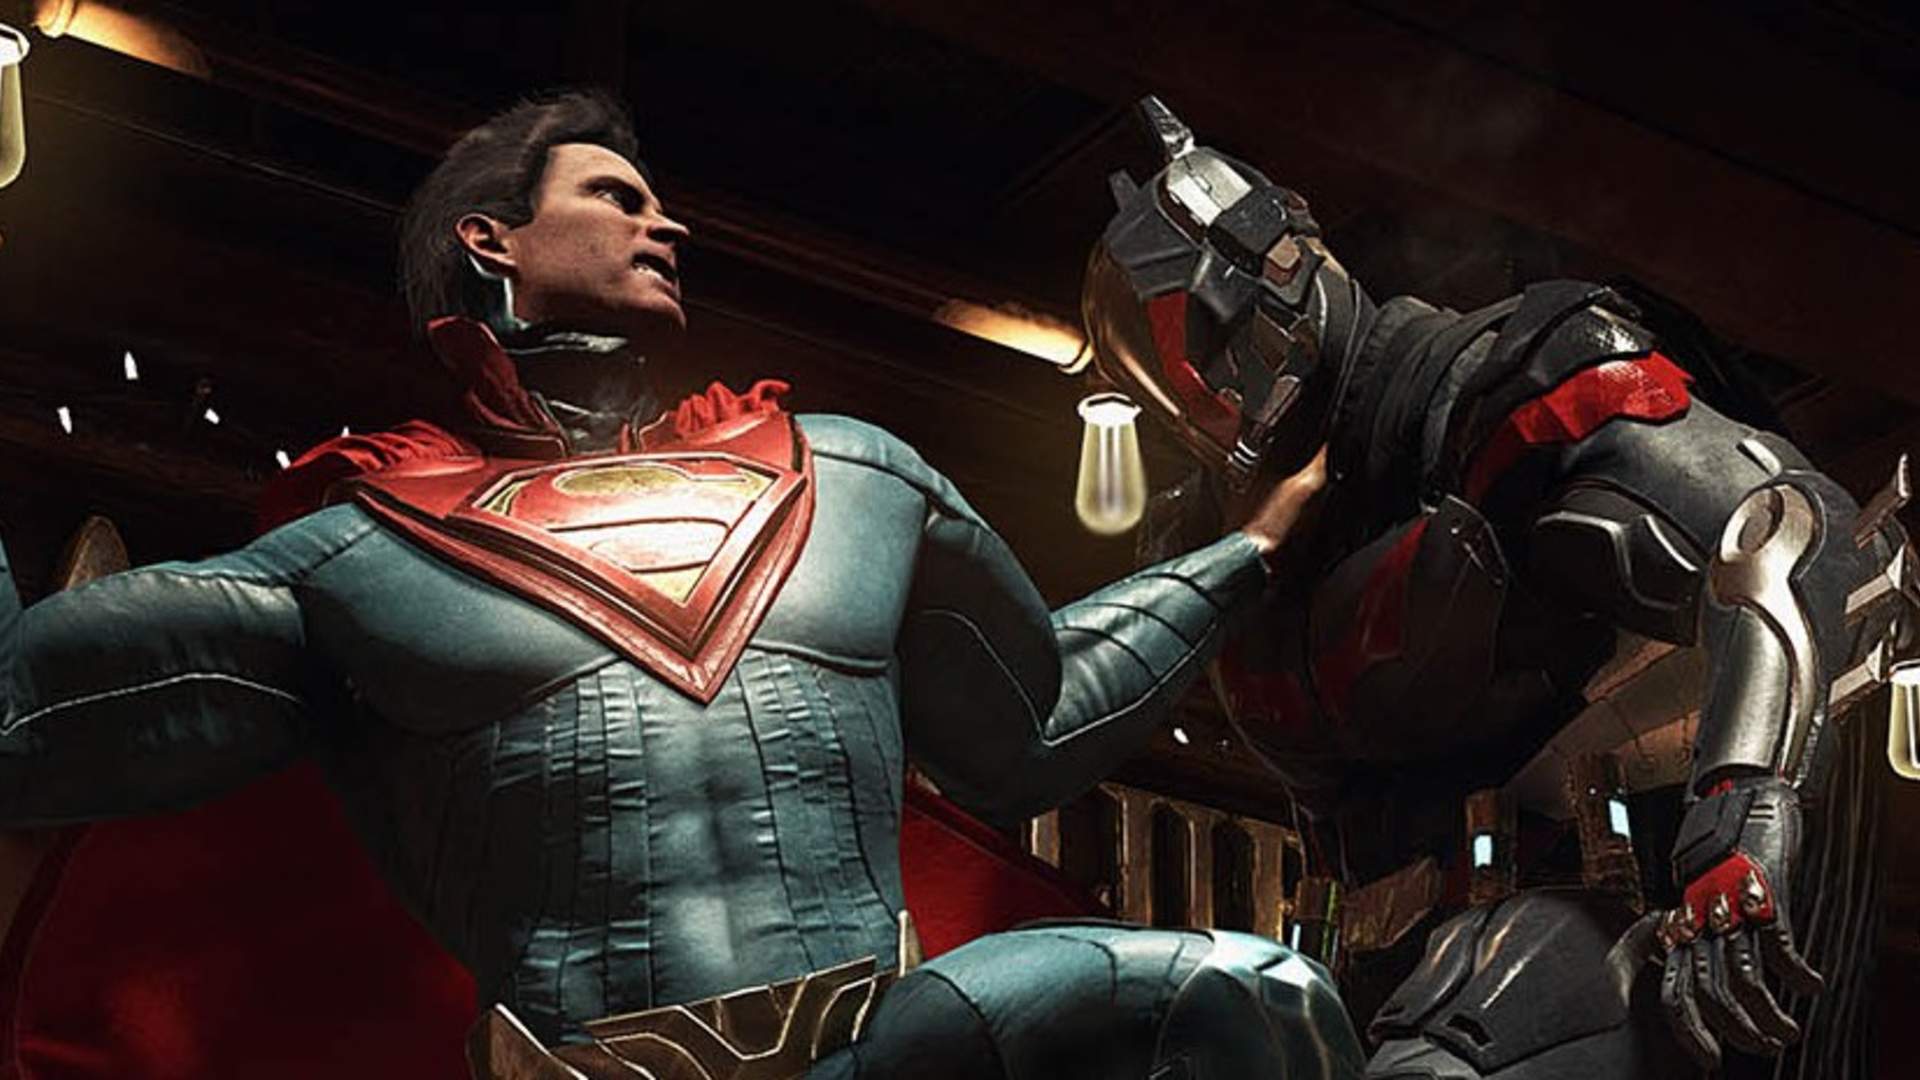 Ed Boon Thinks Injustice Would Make A Great Film